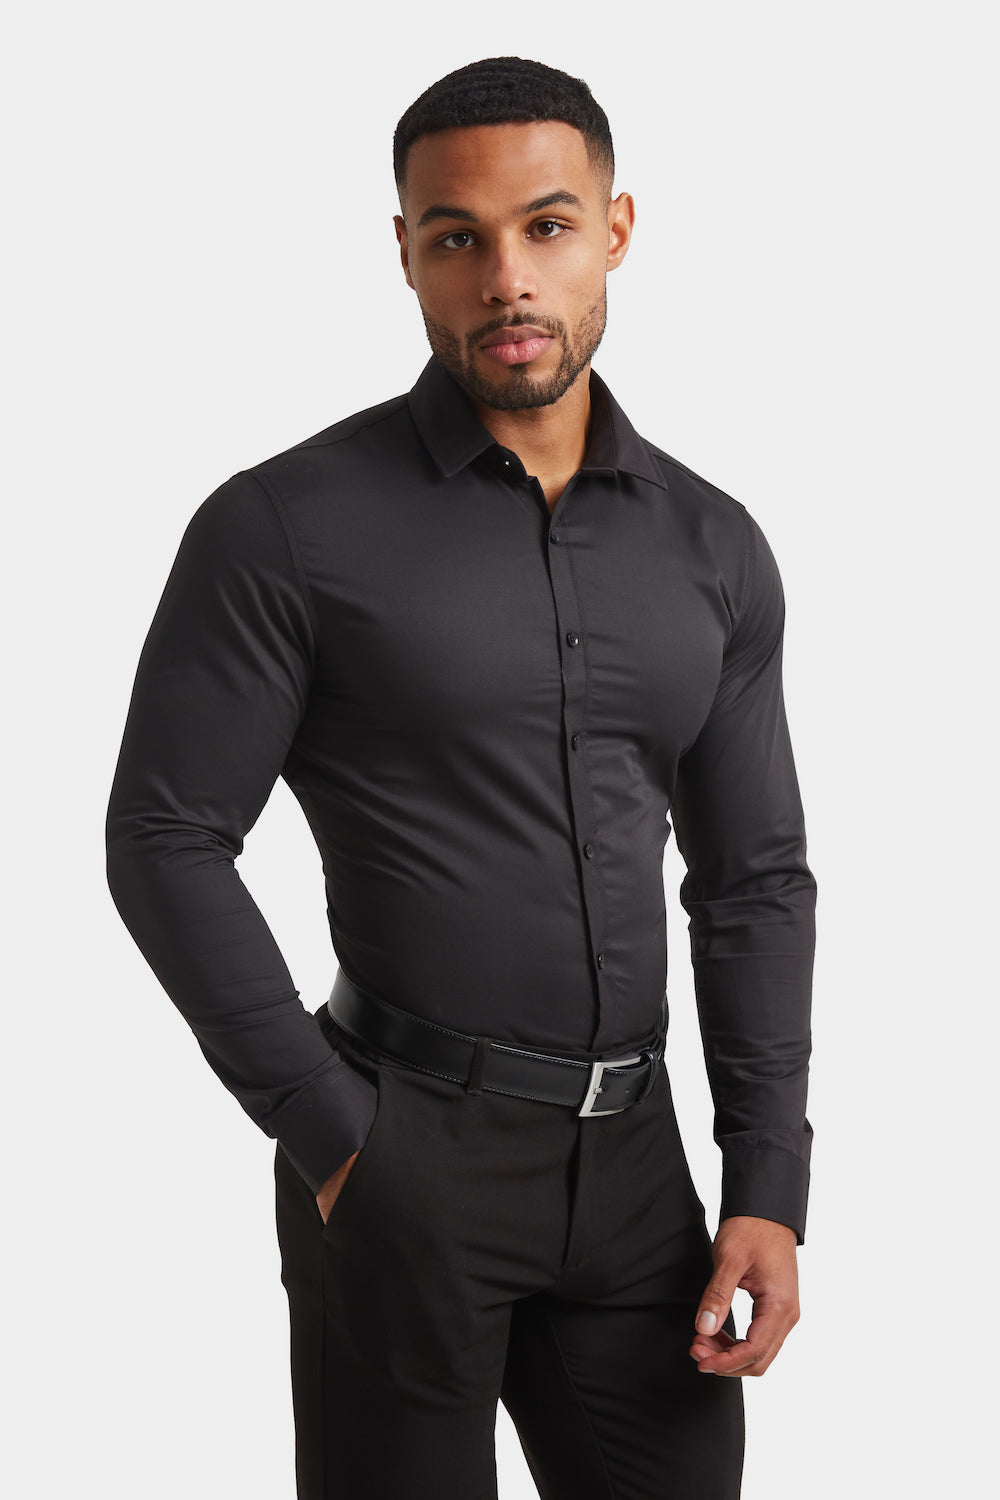 Muscle Fit Shirts - TAILORED ATHLETE - ROW